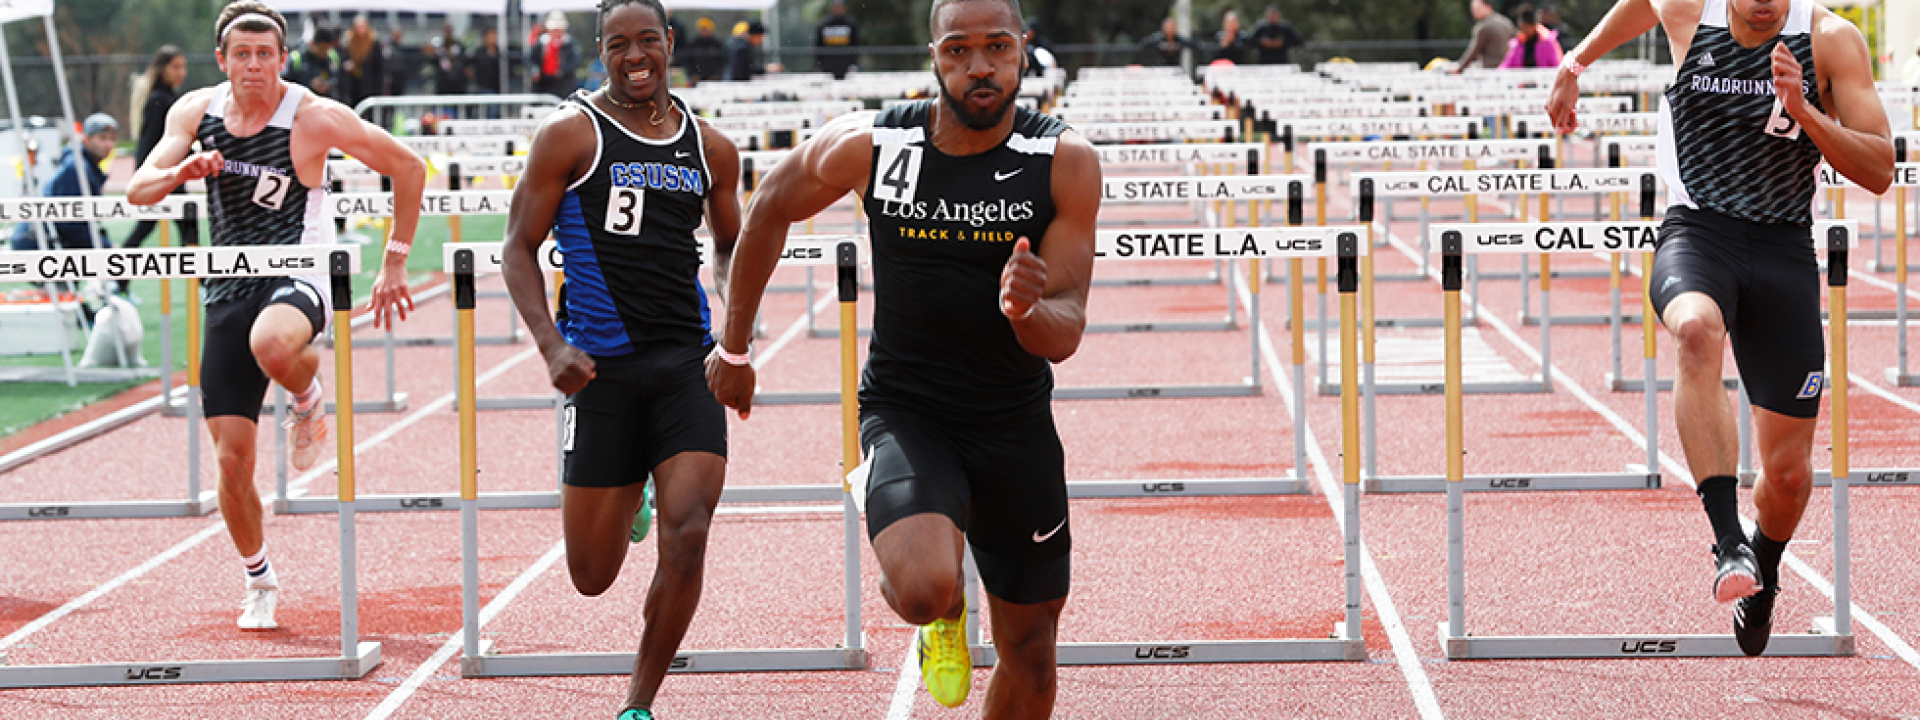 Image of a Cal State LA track star leading a hurdle race. 